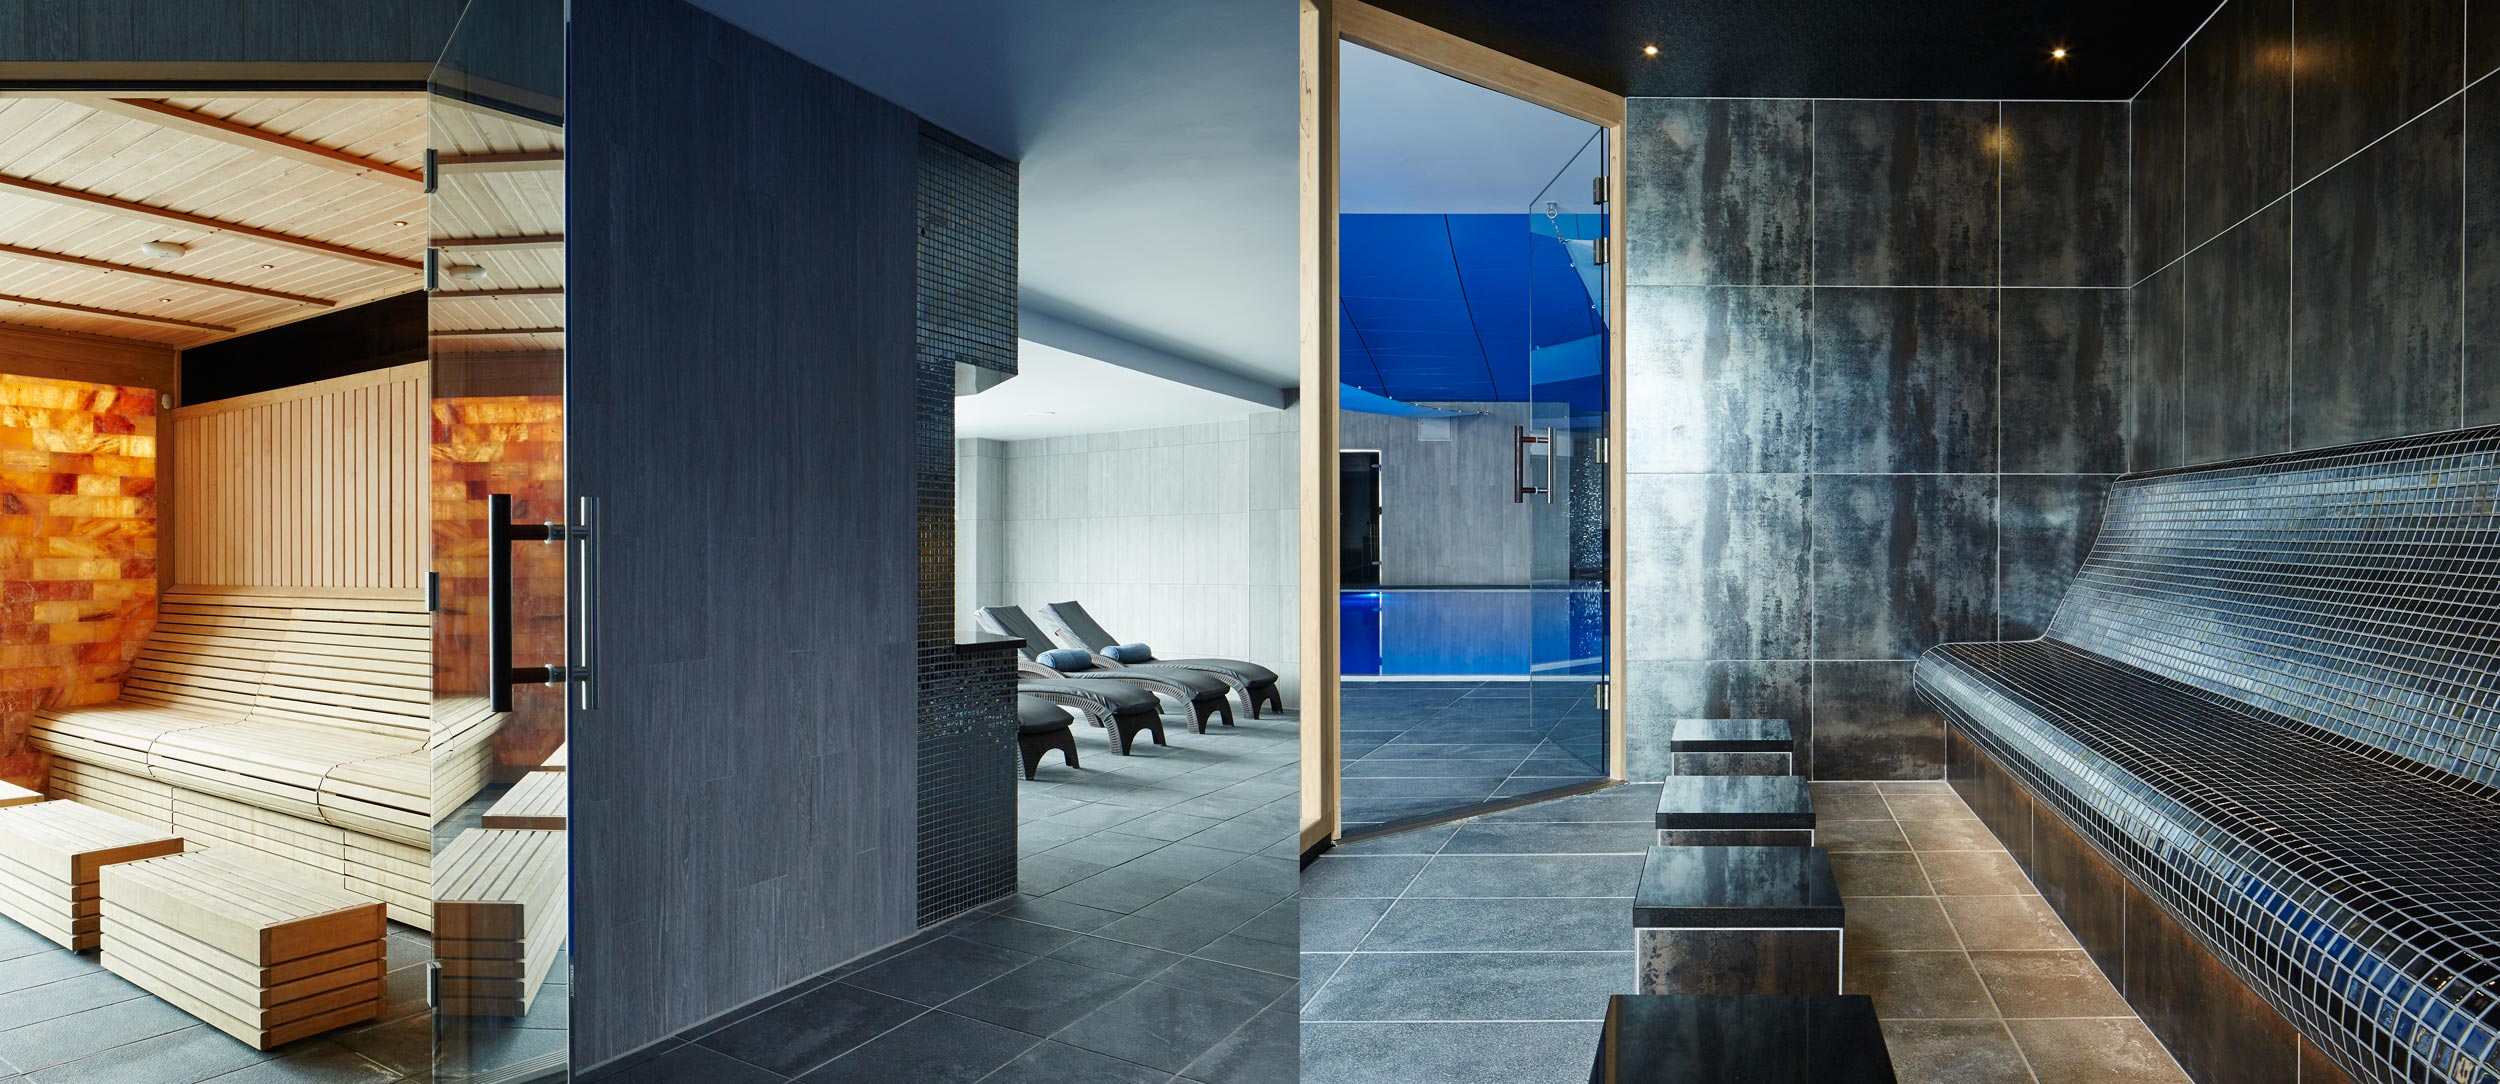 The spa at Formby Hall resort, UK.  Spa photography by Mike Caldwell